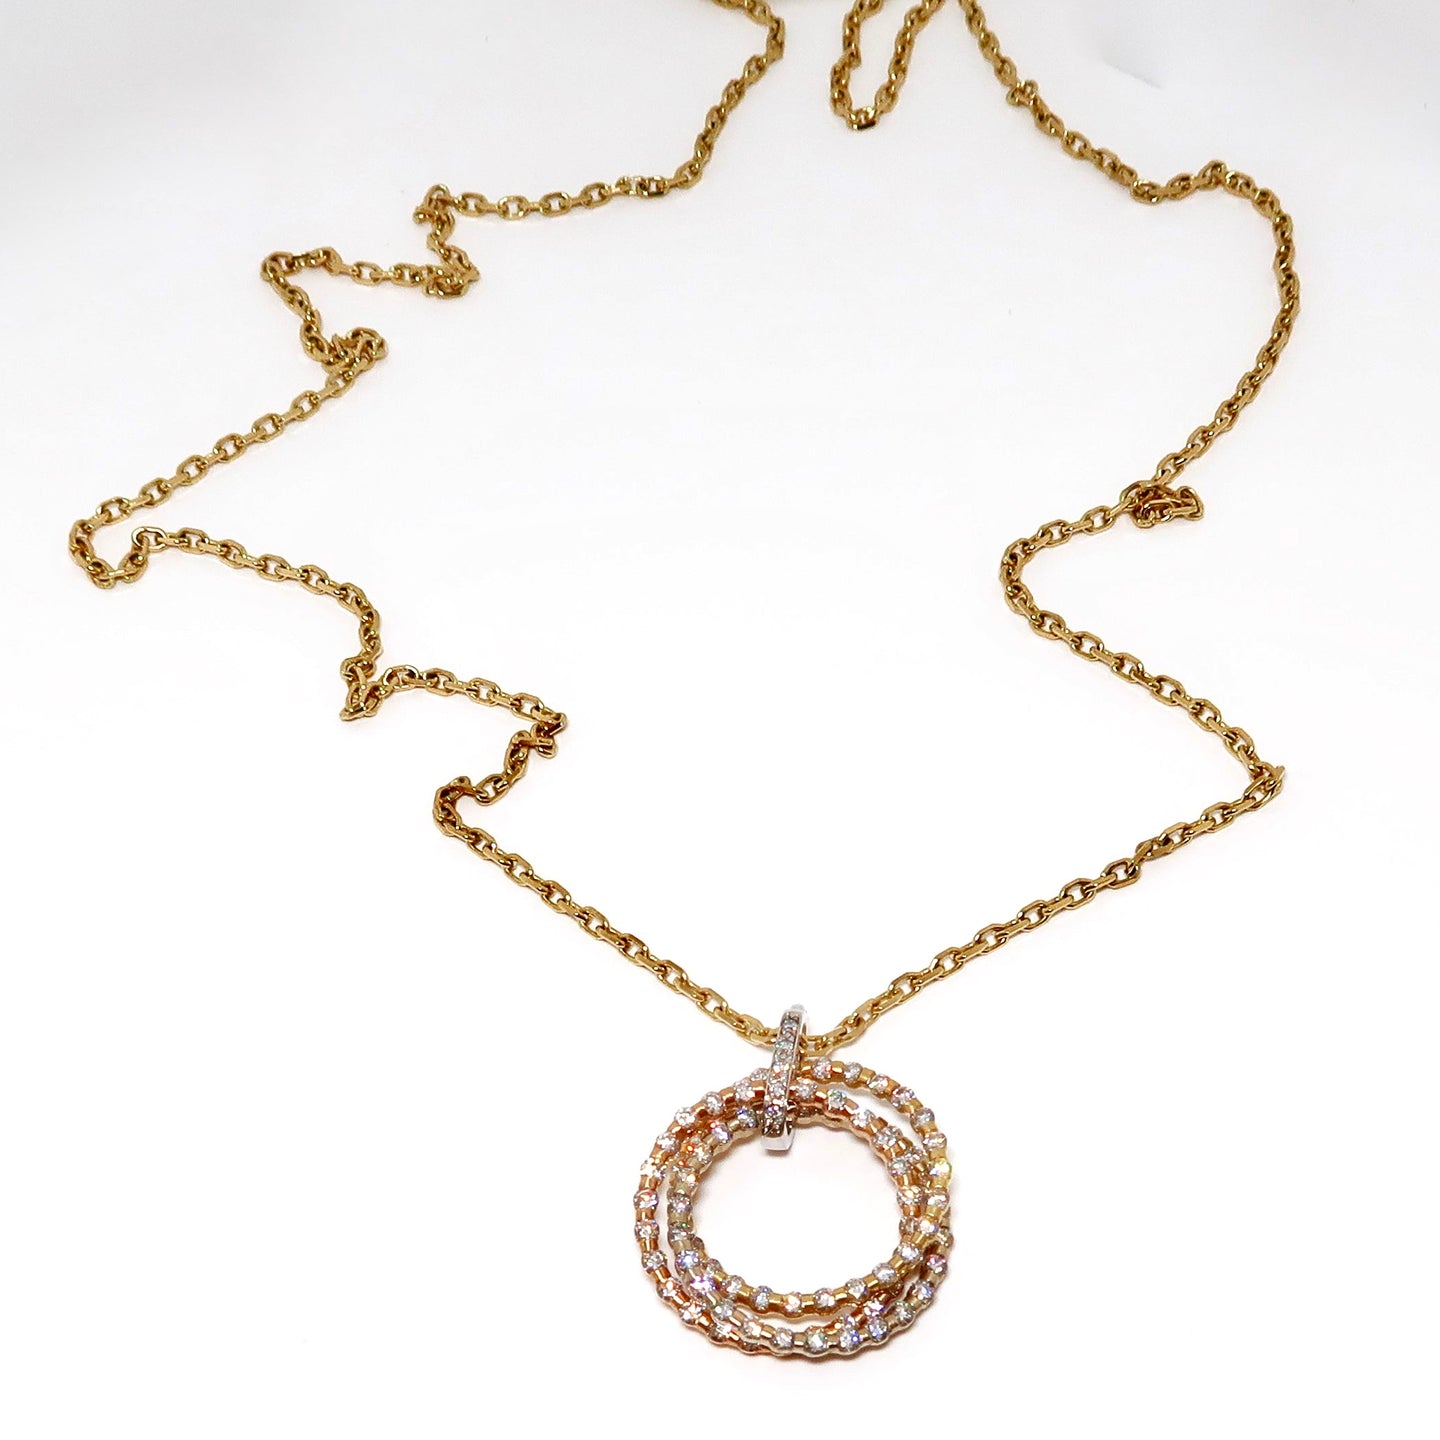 18k Yellow, White, and Pink Gold Diamond 3 Ring Pendant Necklace